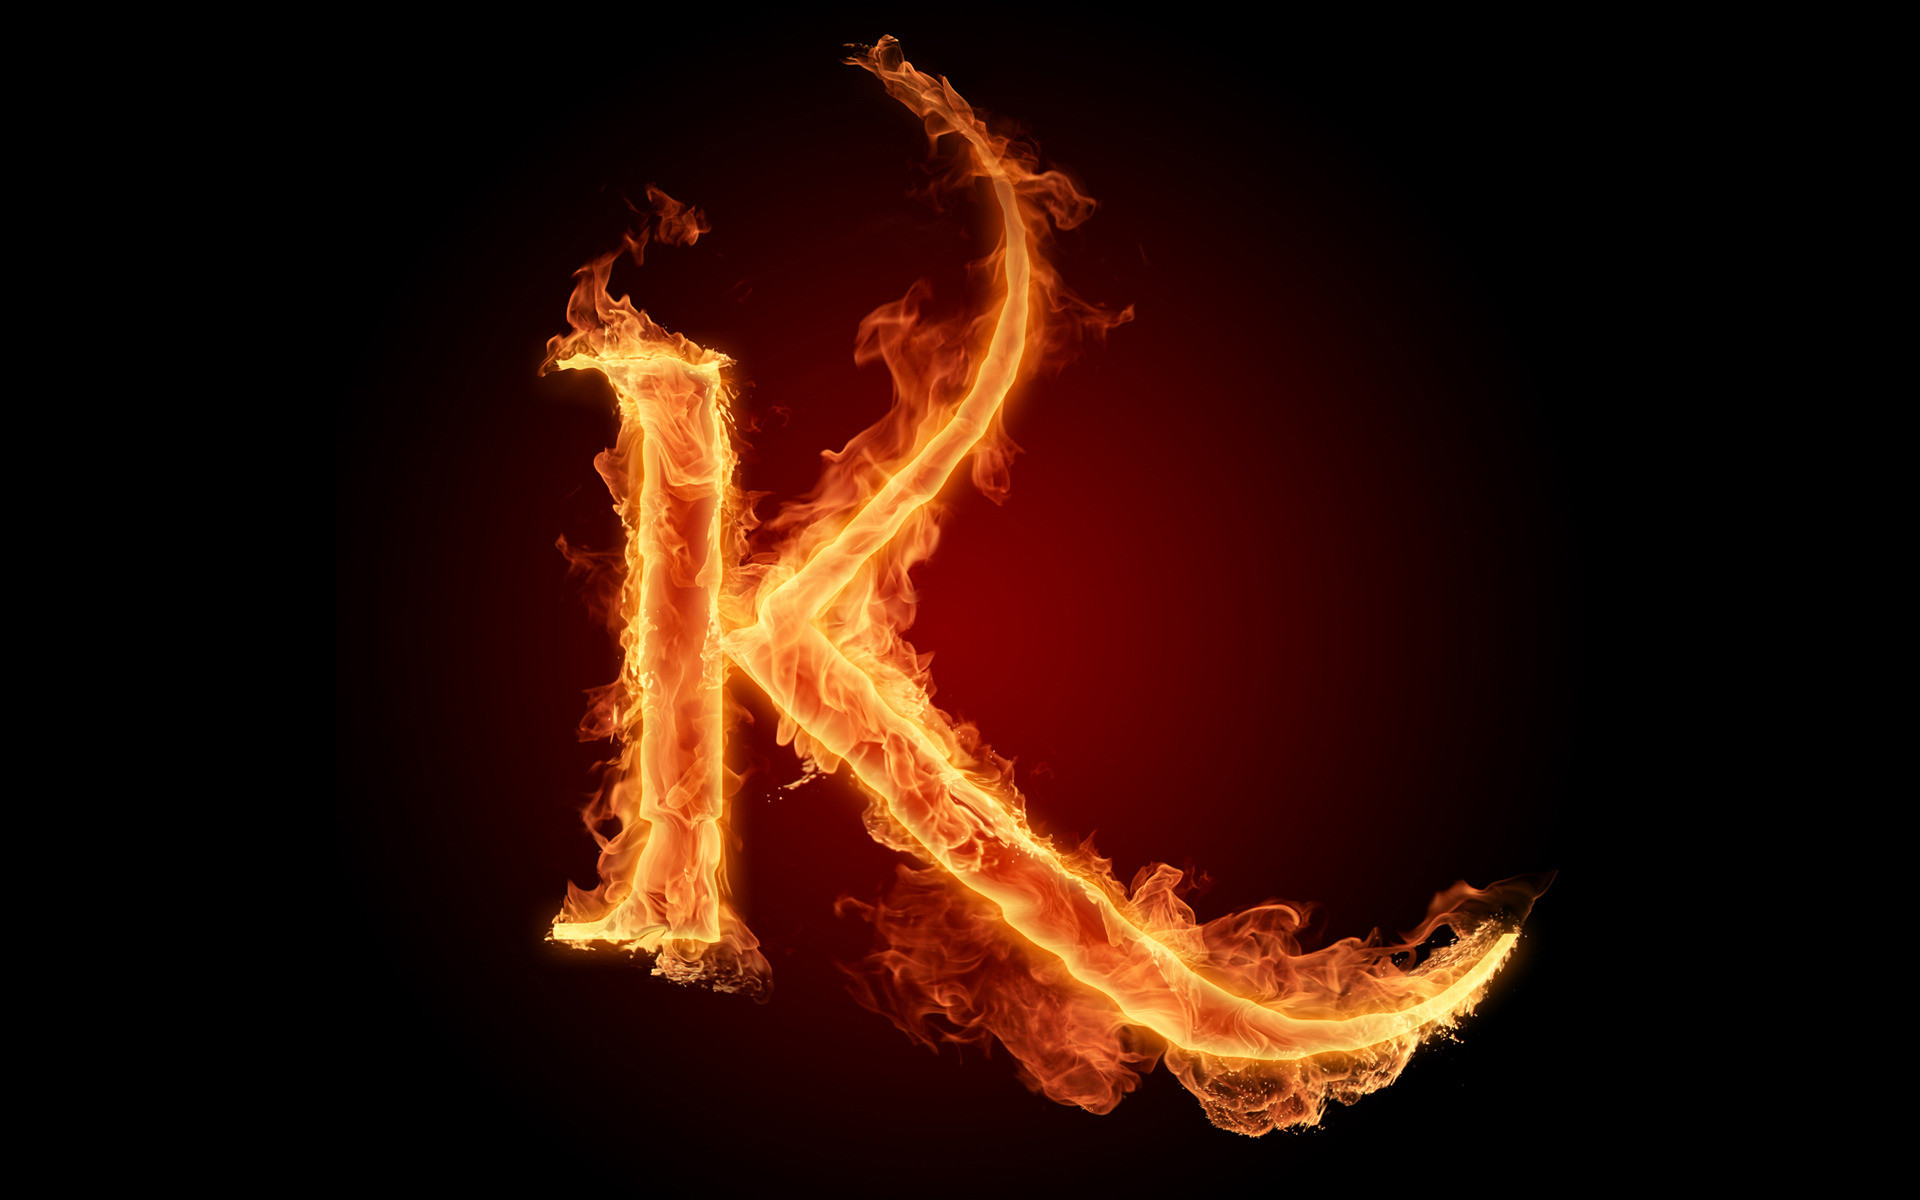 1920x1200 The fiery English alphabet picture K Wallpapers - HD Wallpapers 73625